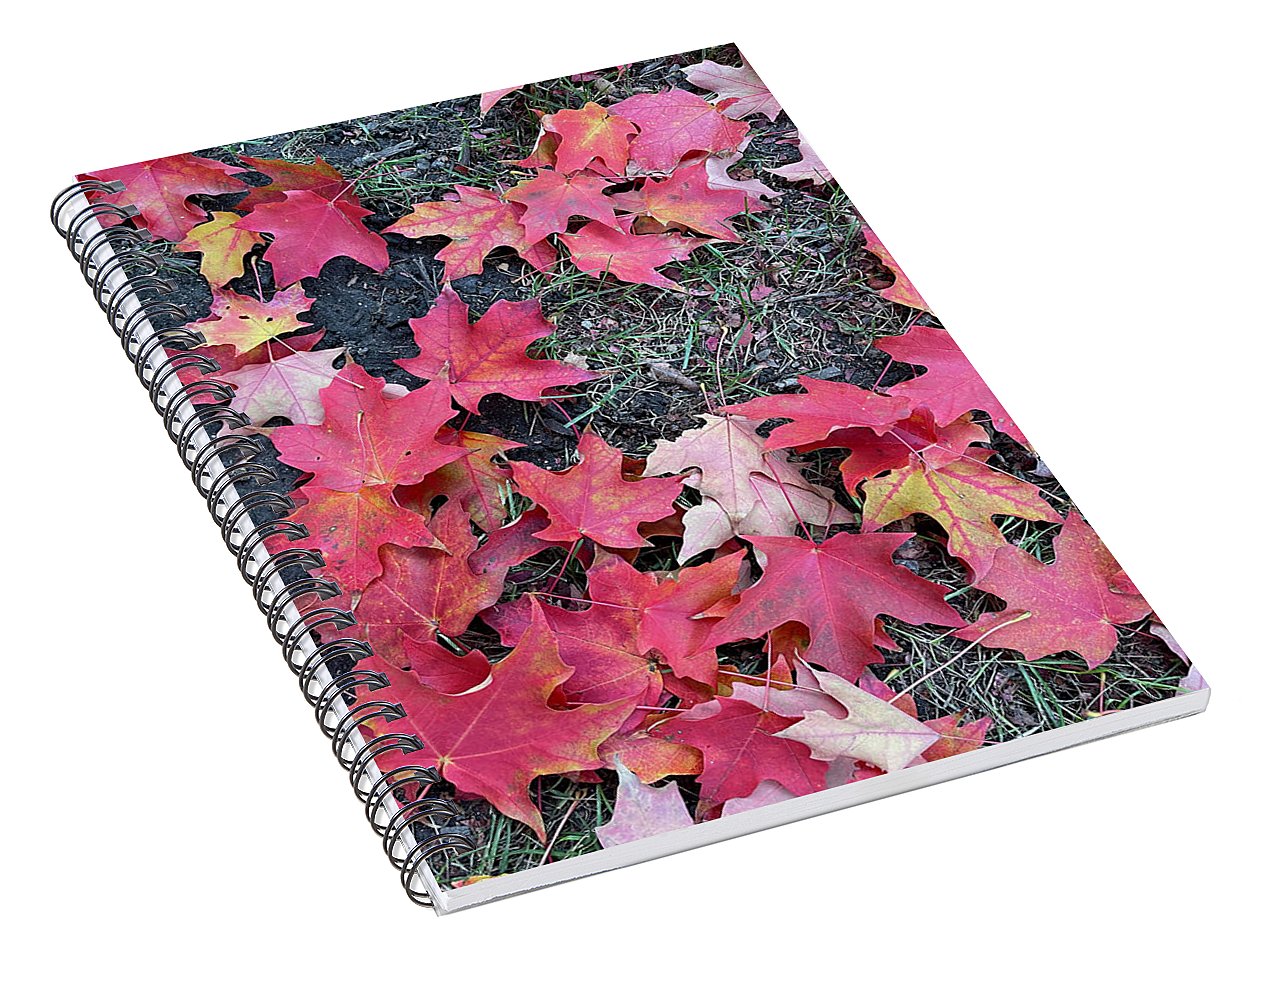 Maple Leaves In October 4 - Spiral Notebook